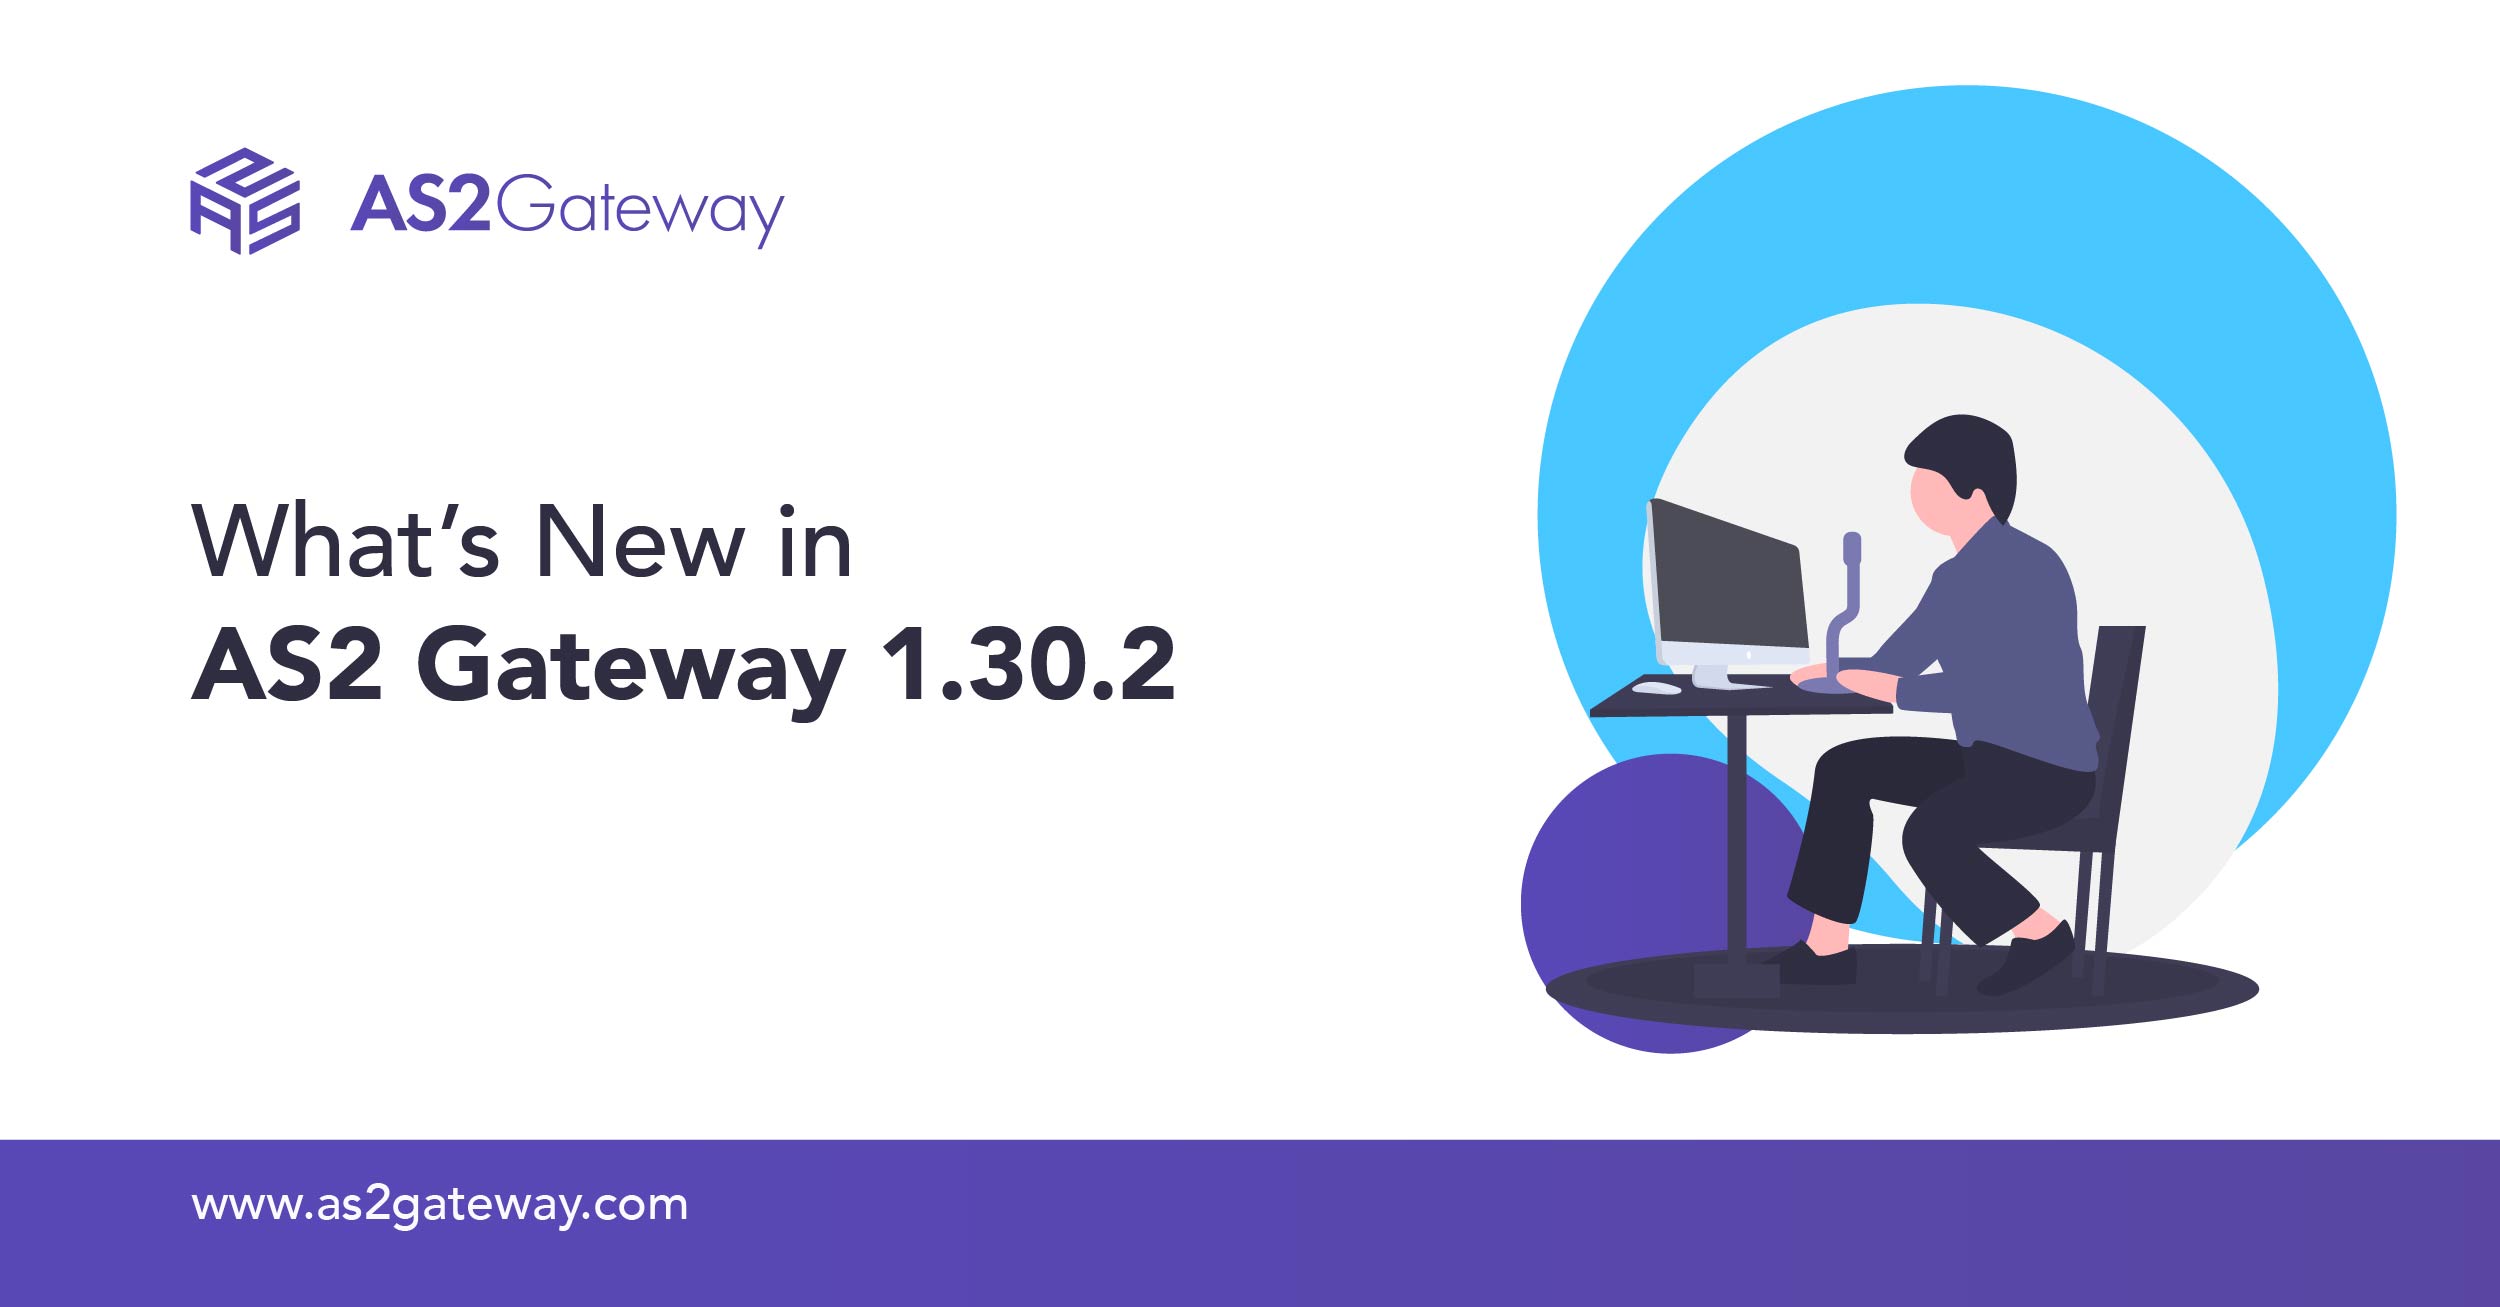 What’s New in AS2 Gateway 1.30.2